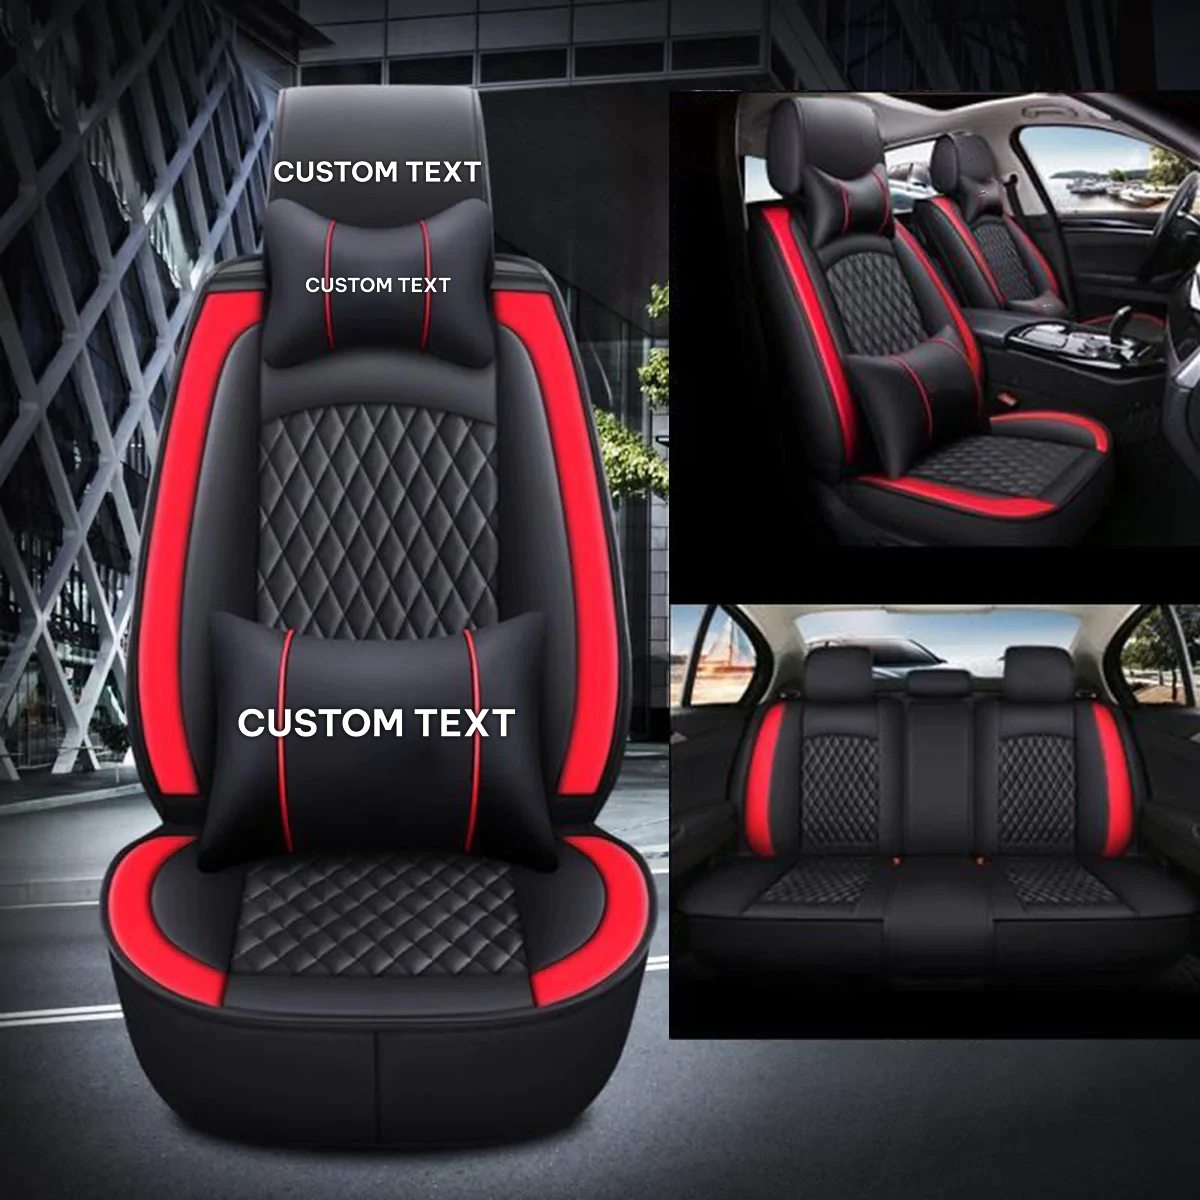 Custom Text For Seat Covers 5 Seats Full Set, Custom Fit For Your Cars, Leatherette Automotive Seat Cushion Protector Universal Fit, Vehicle Auto Interior Decor LI13988